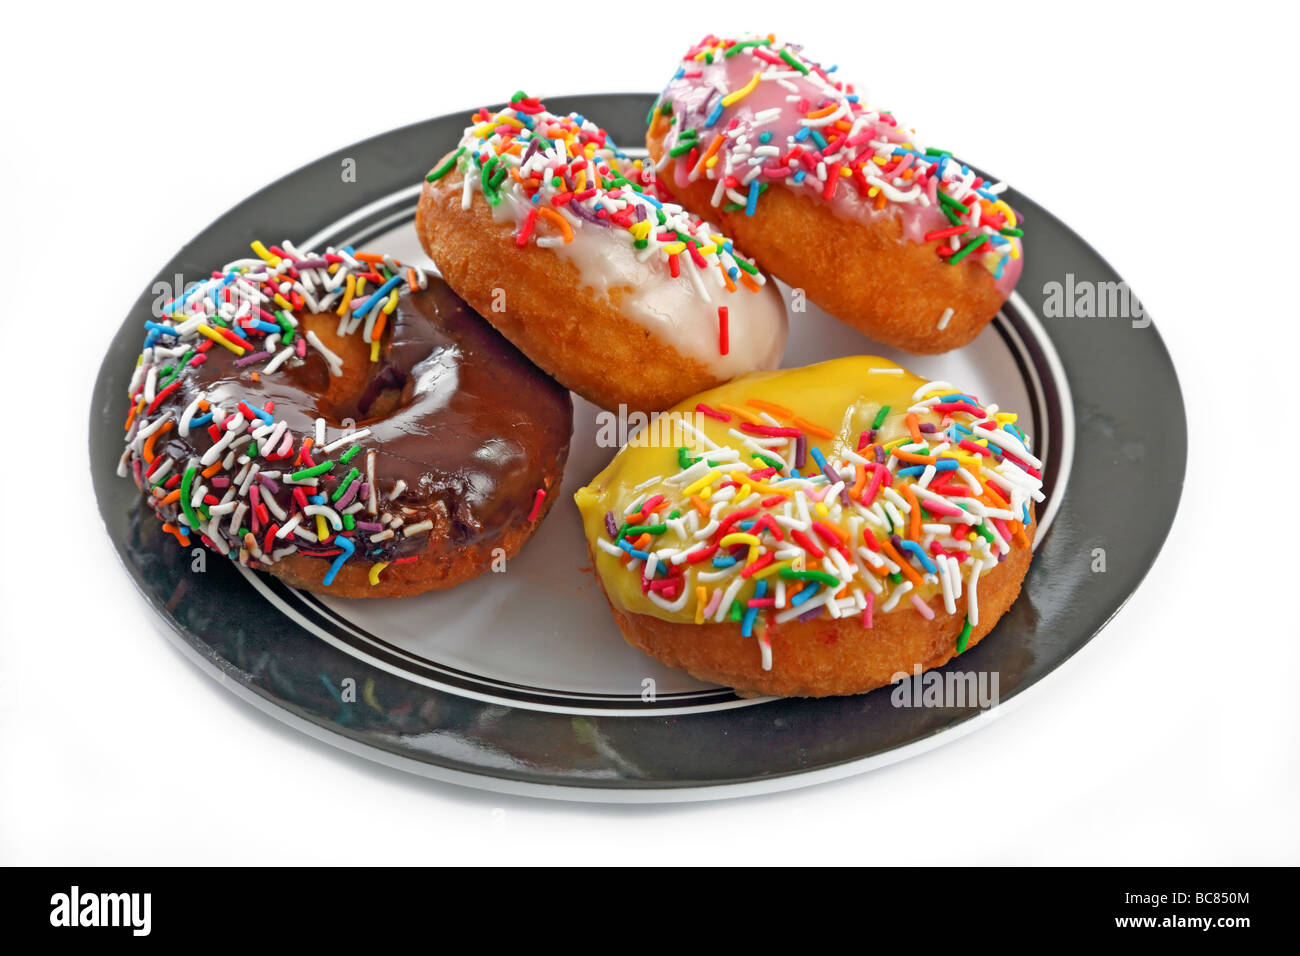 Junk food do nuts iced on a plate Stock Photo